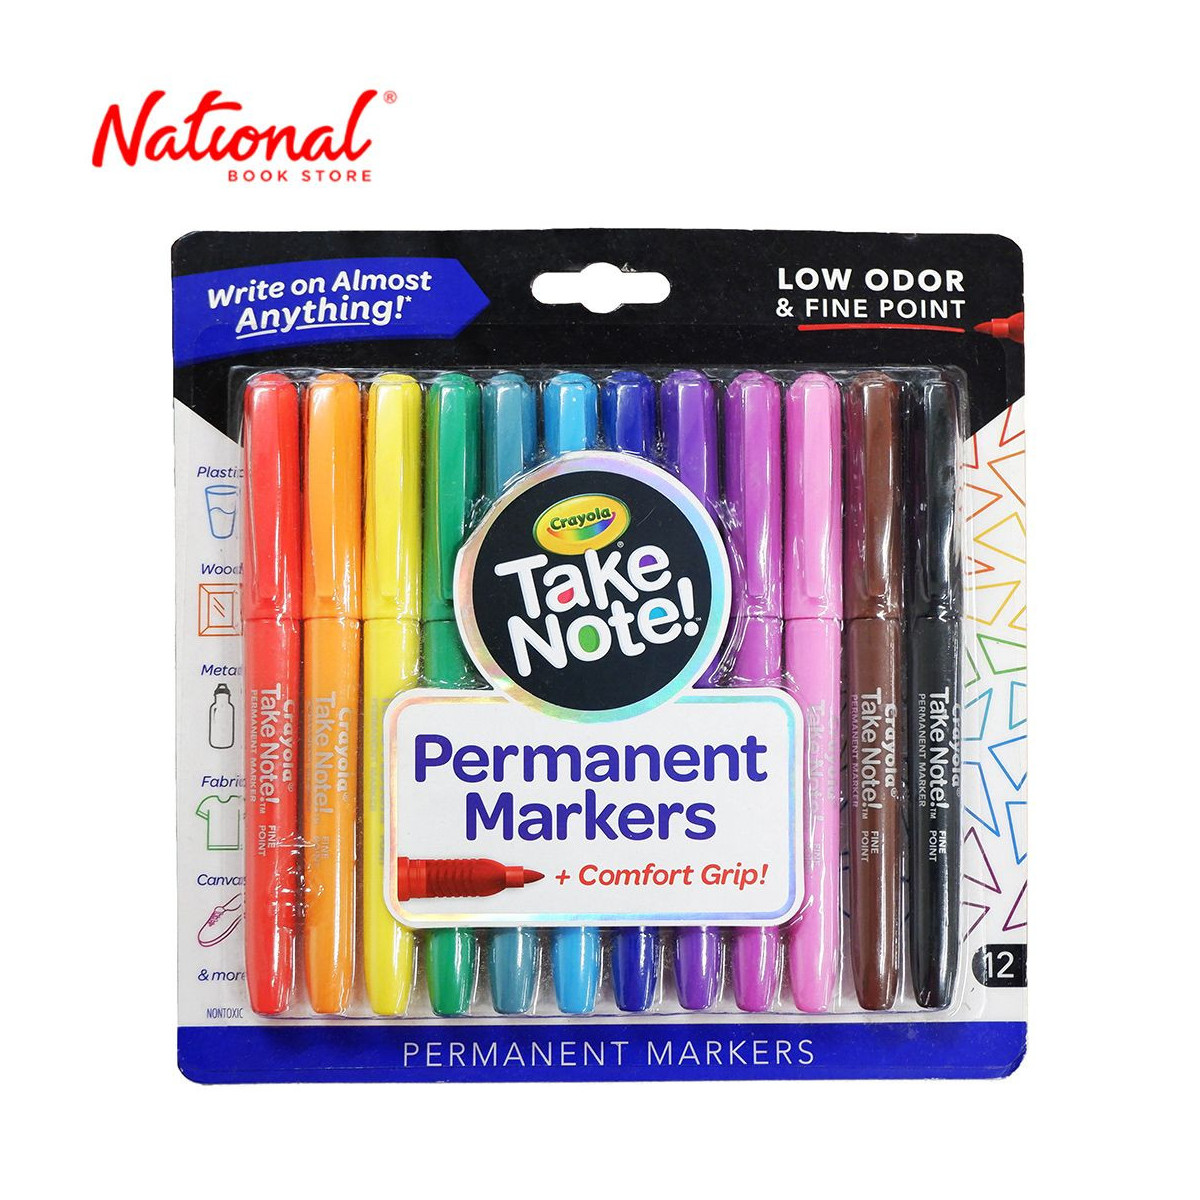 https://www.nationalbookstore.com/121033-thickbox_default/crayola-take-note-permanent-markers-58-6539-12-colors-.jpg